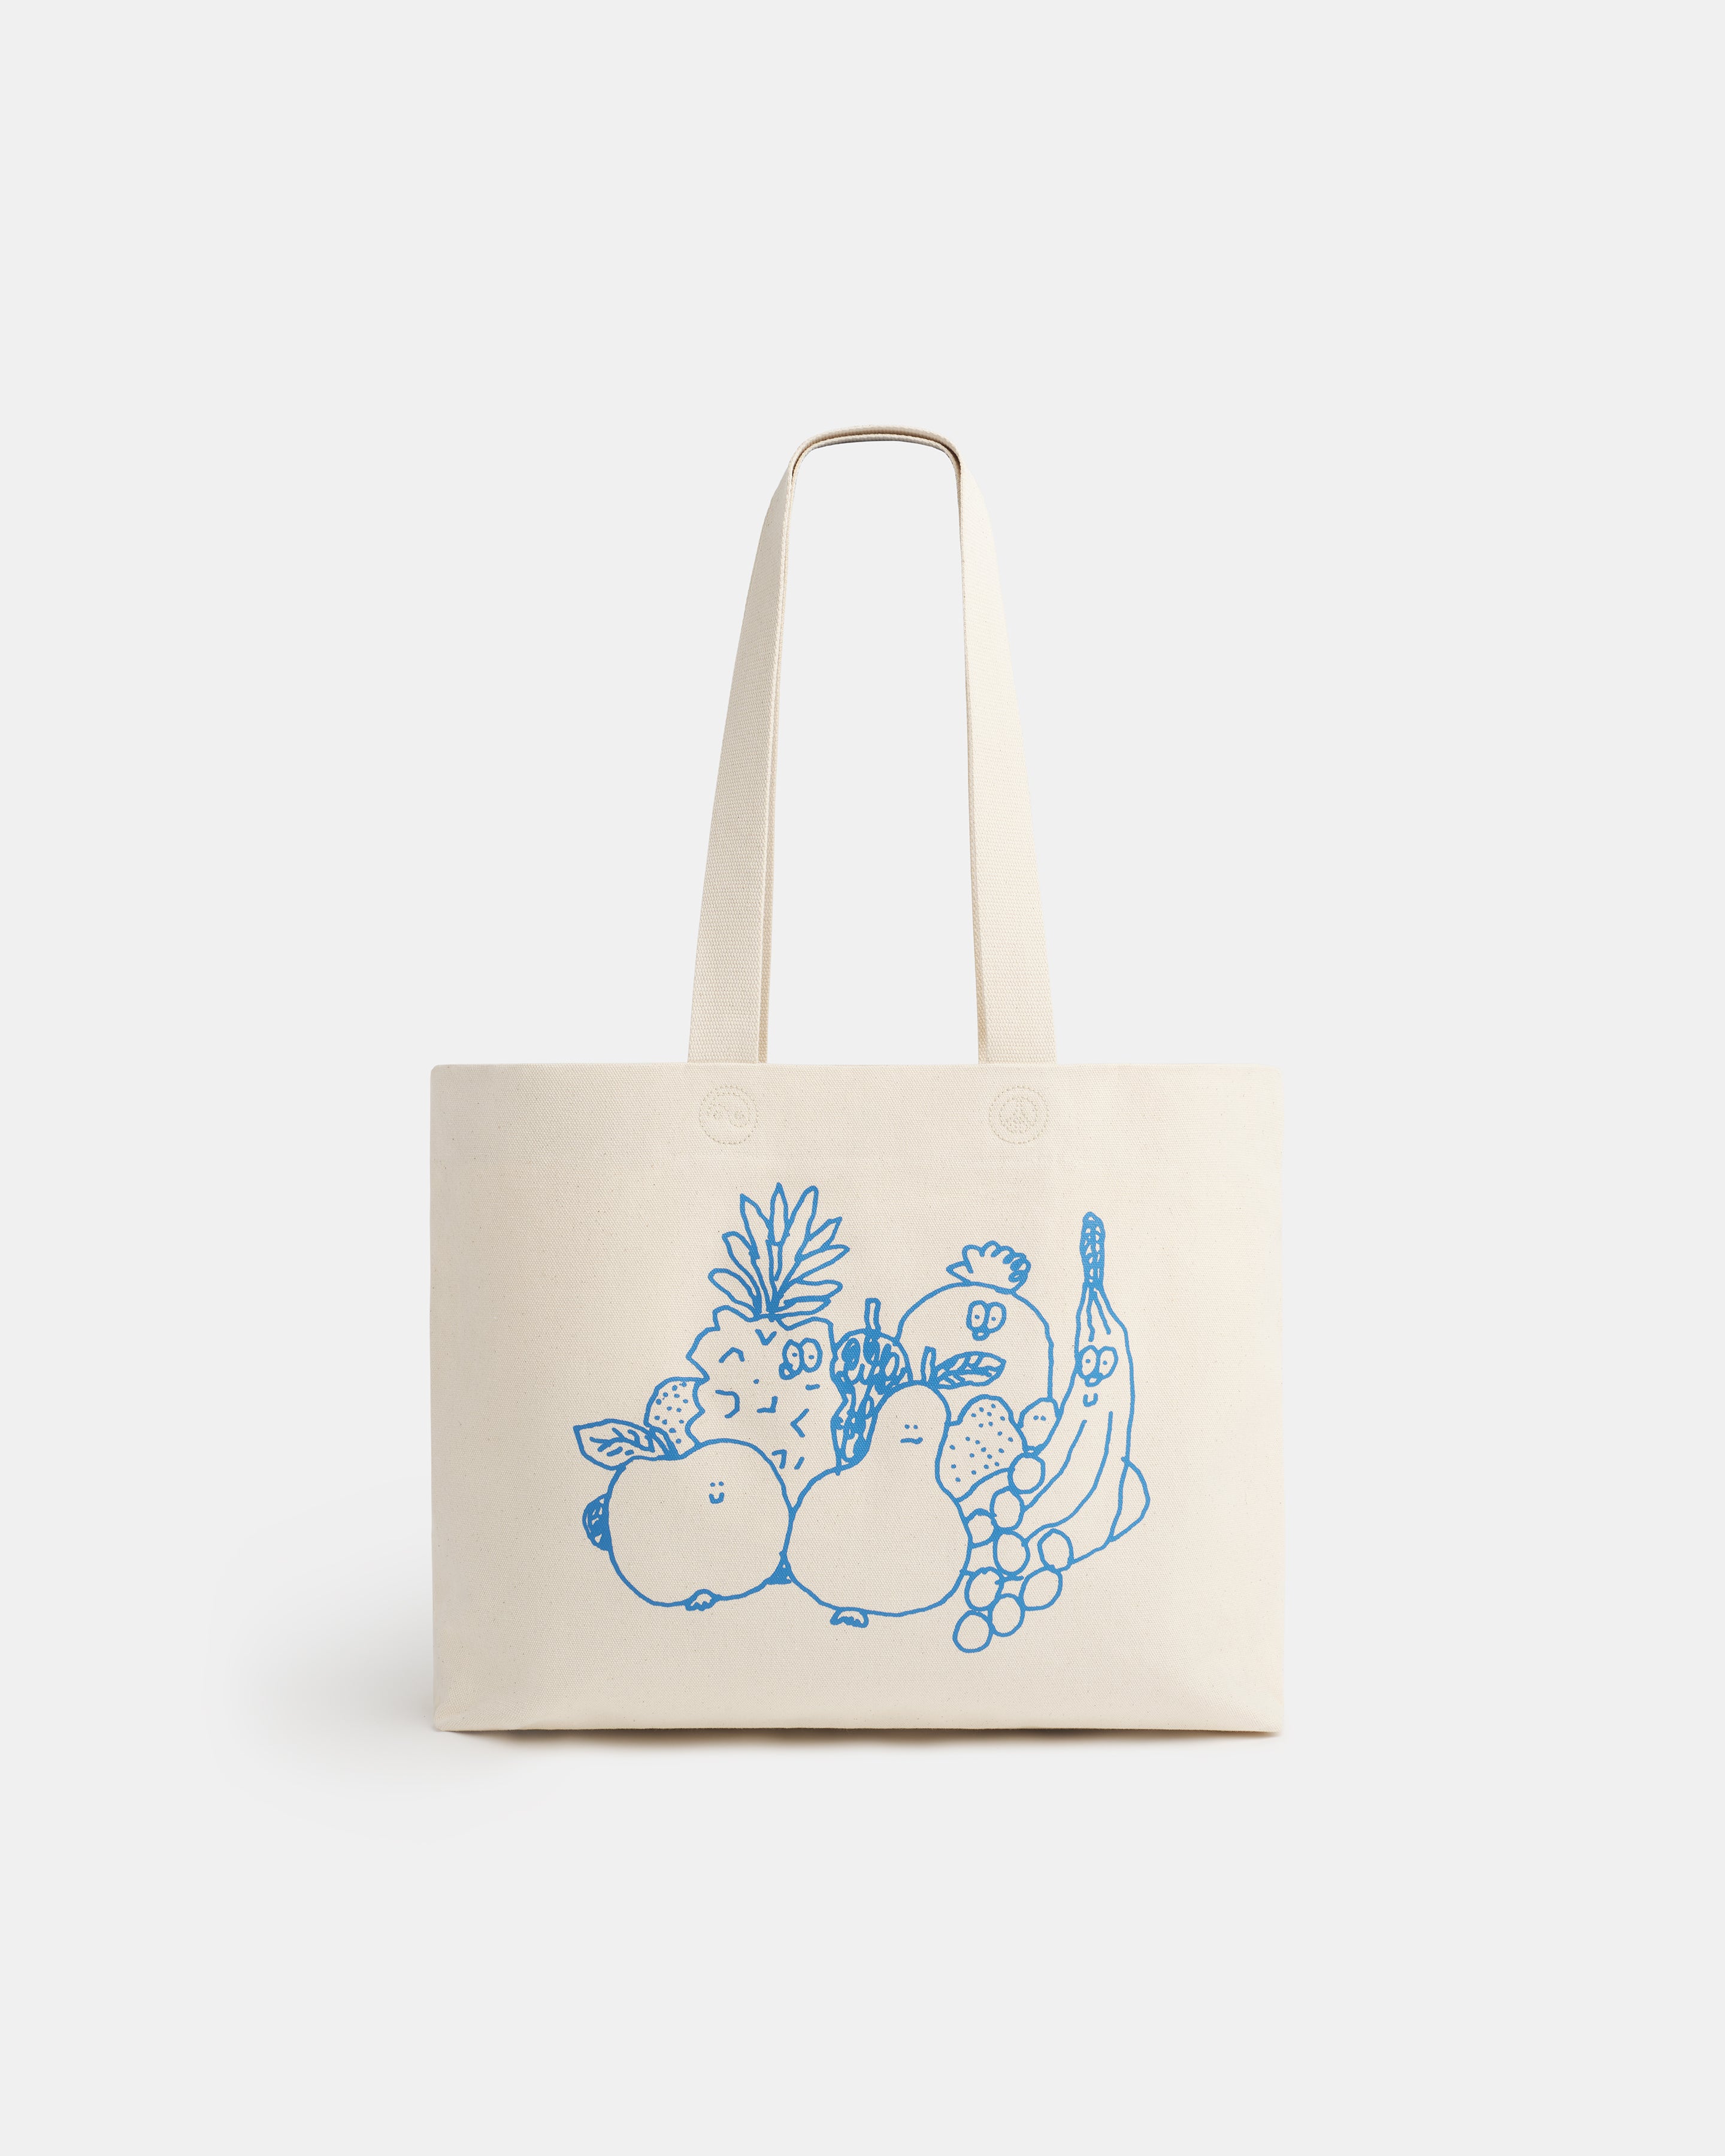 Tote – Madhappy